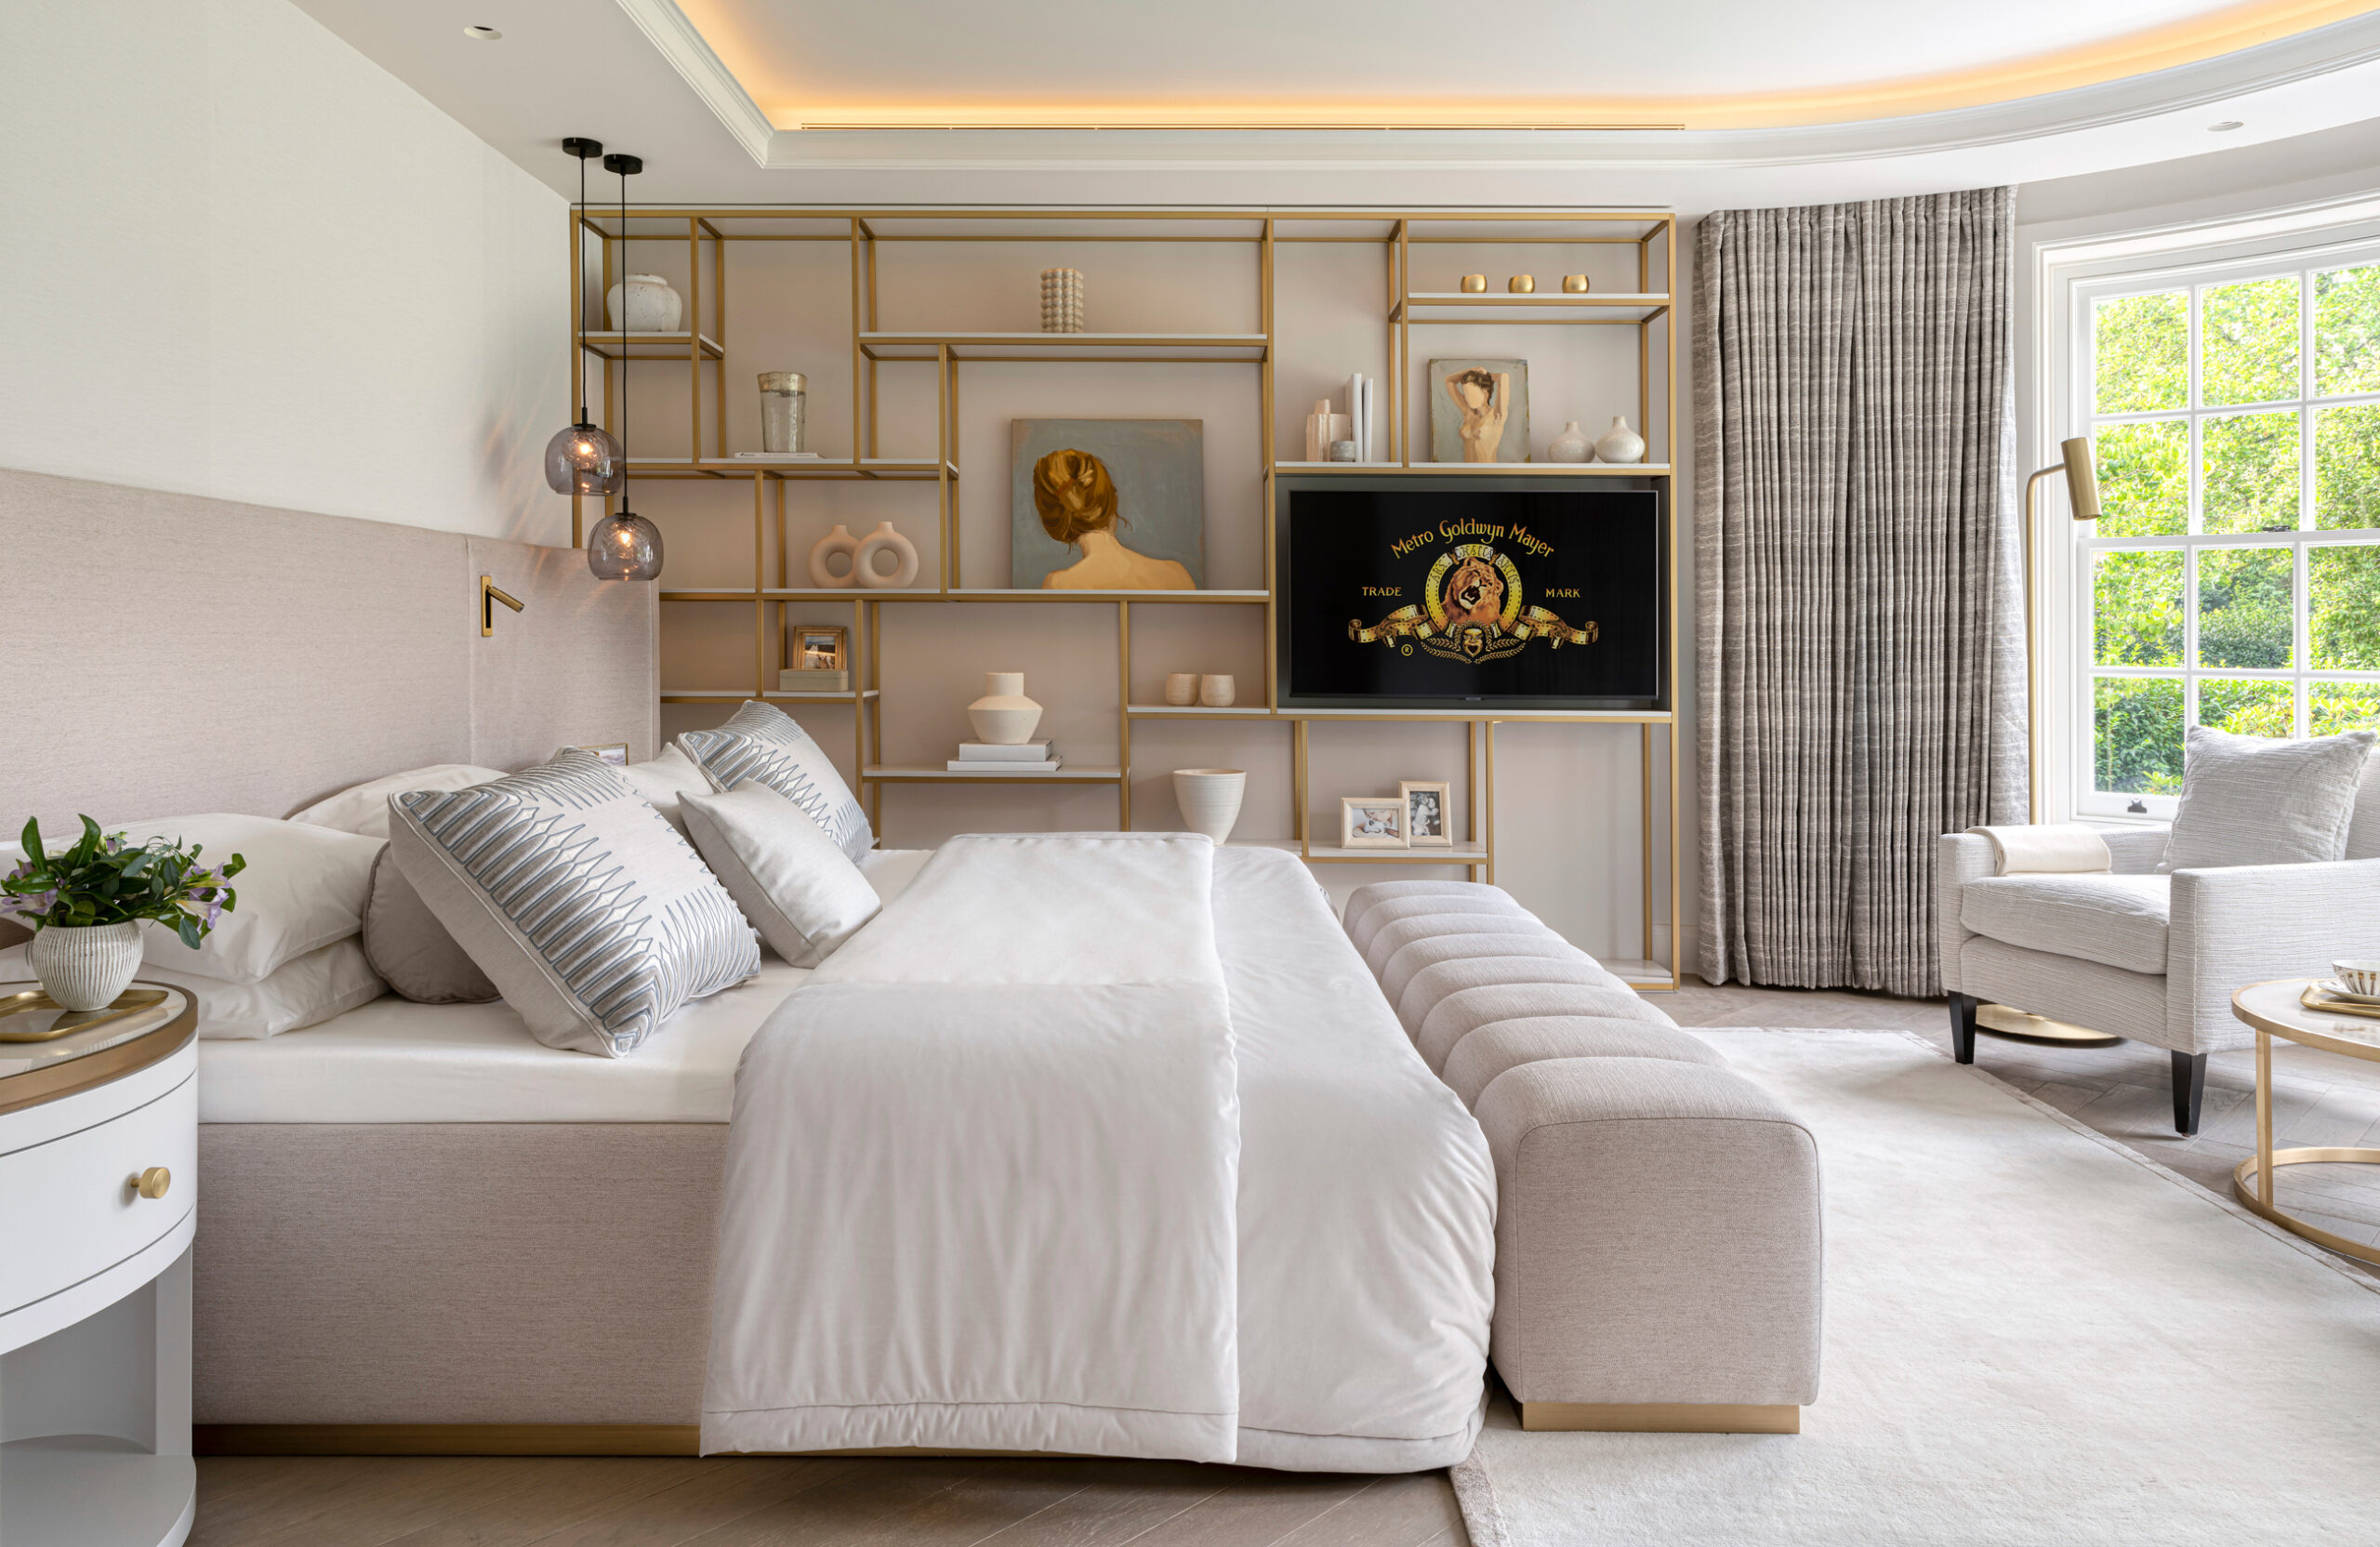 Master bedroom suite in with rich textures and brass details